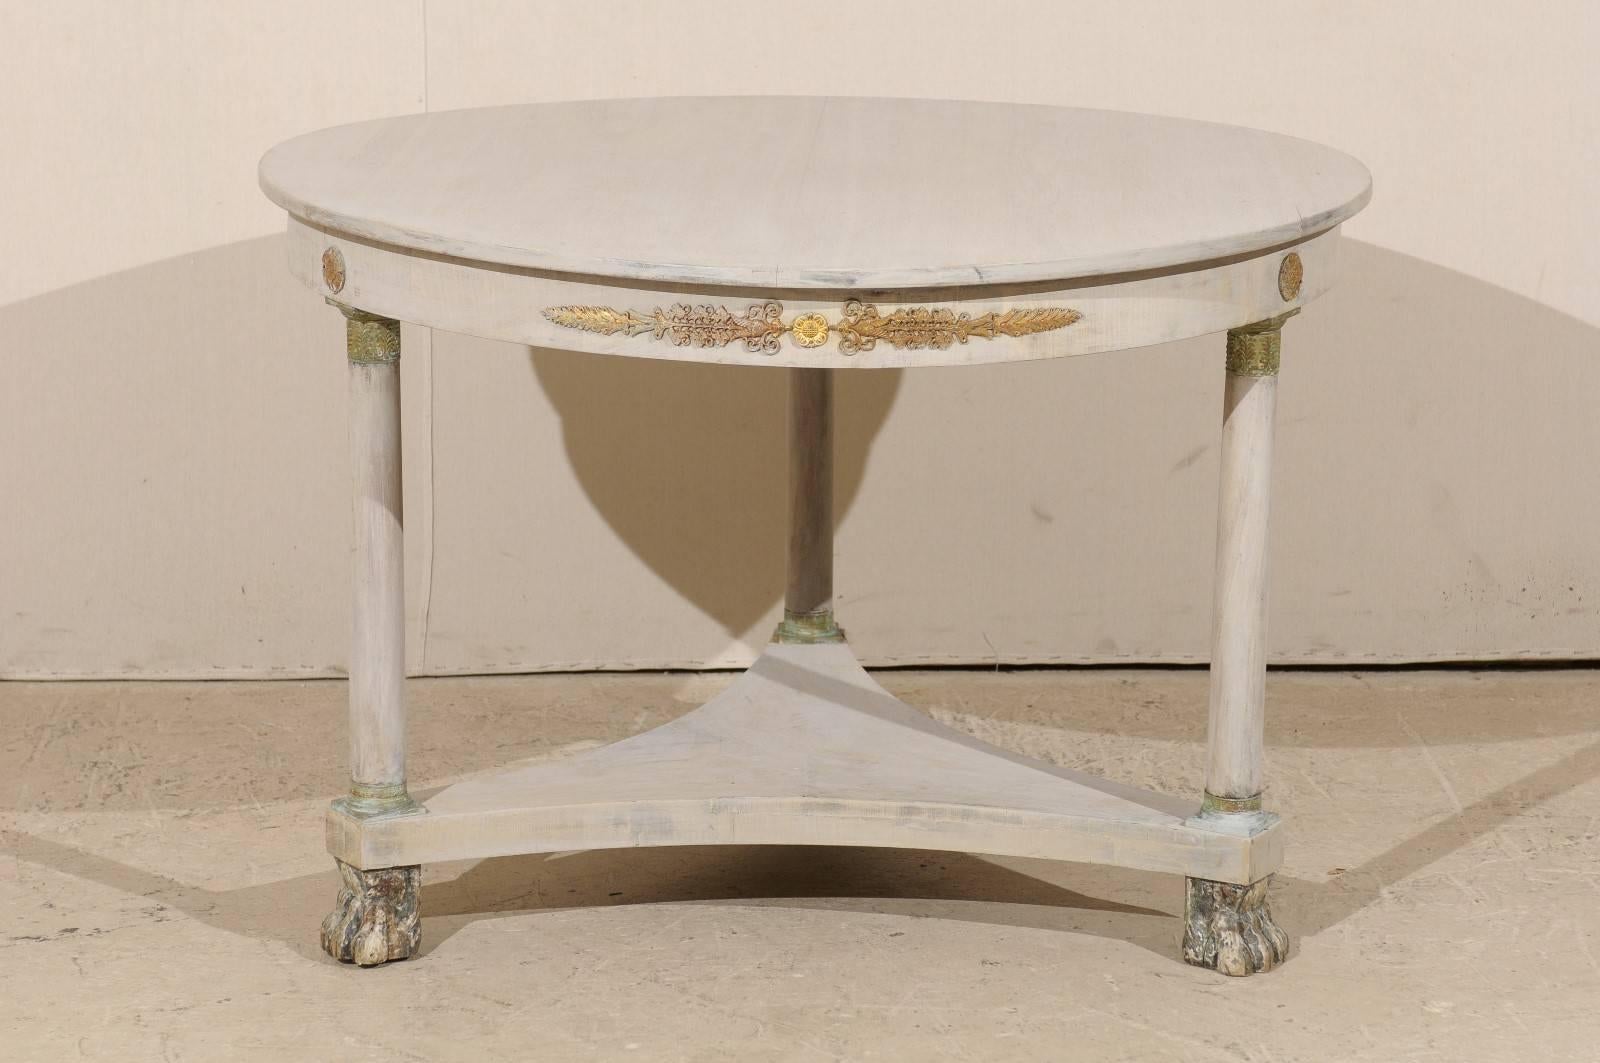 A French 19th century round wood centre table. This French centre table of bleached mahogany has a round slightly warped top. This piece has a triangular stretchered shelf below which connects three legs. This table is raised on lion paw feet. Brass